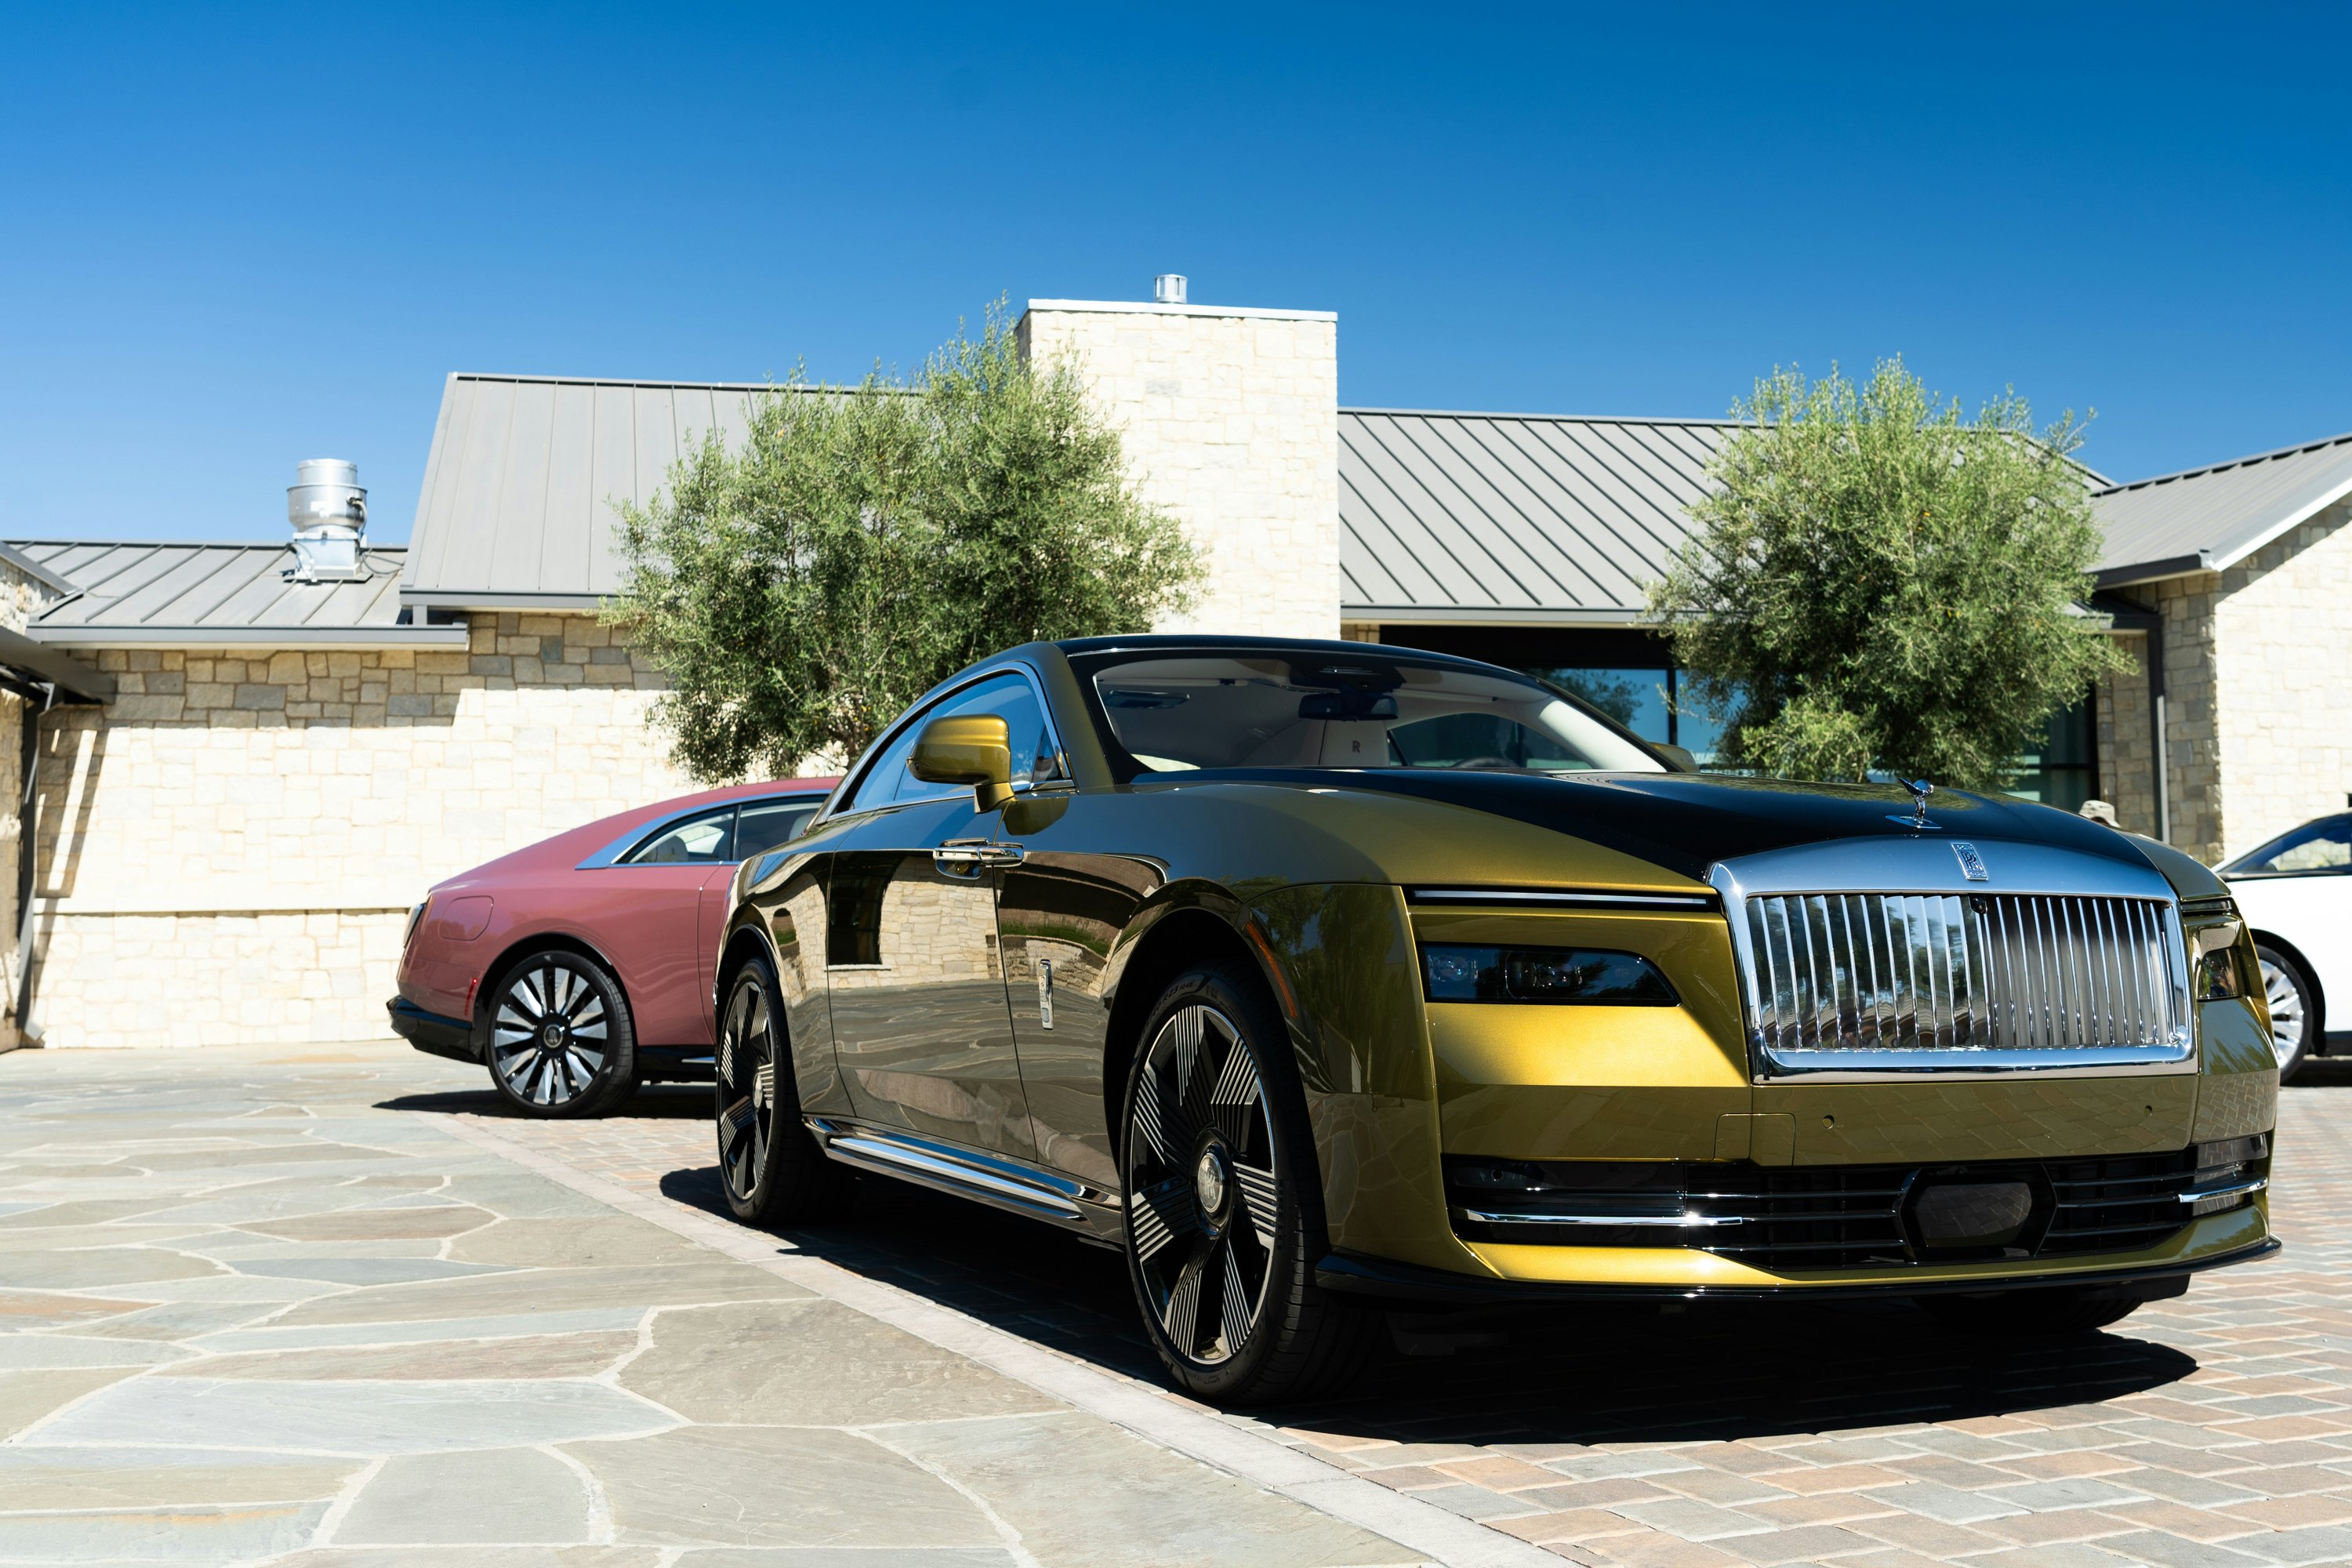 Mansory's Latest Rolls-Royce Phantom Throws Subtlety Out Of The